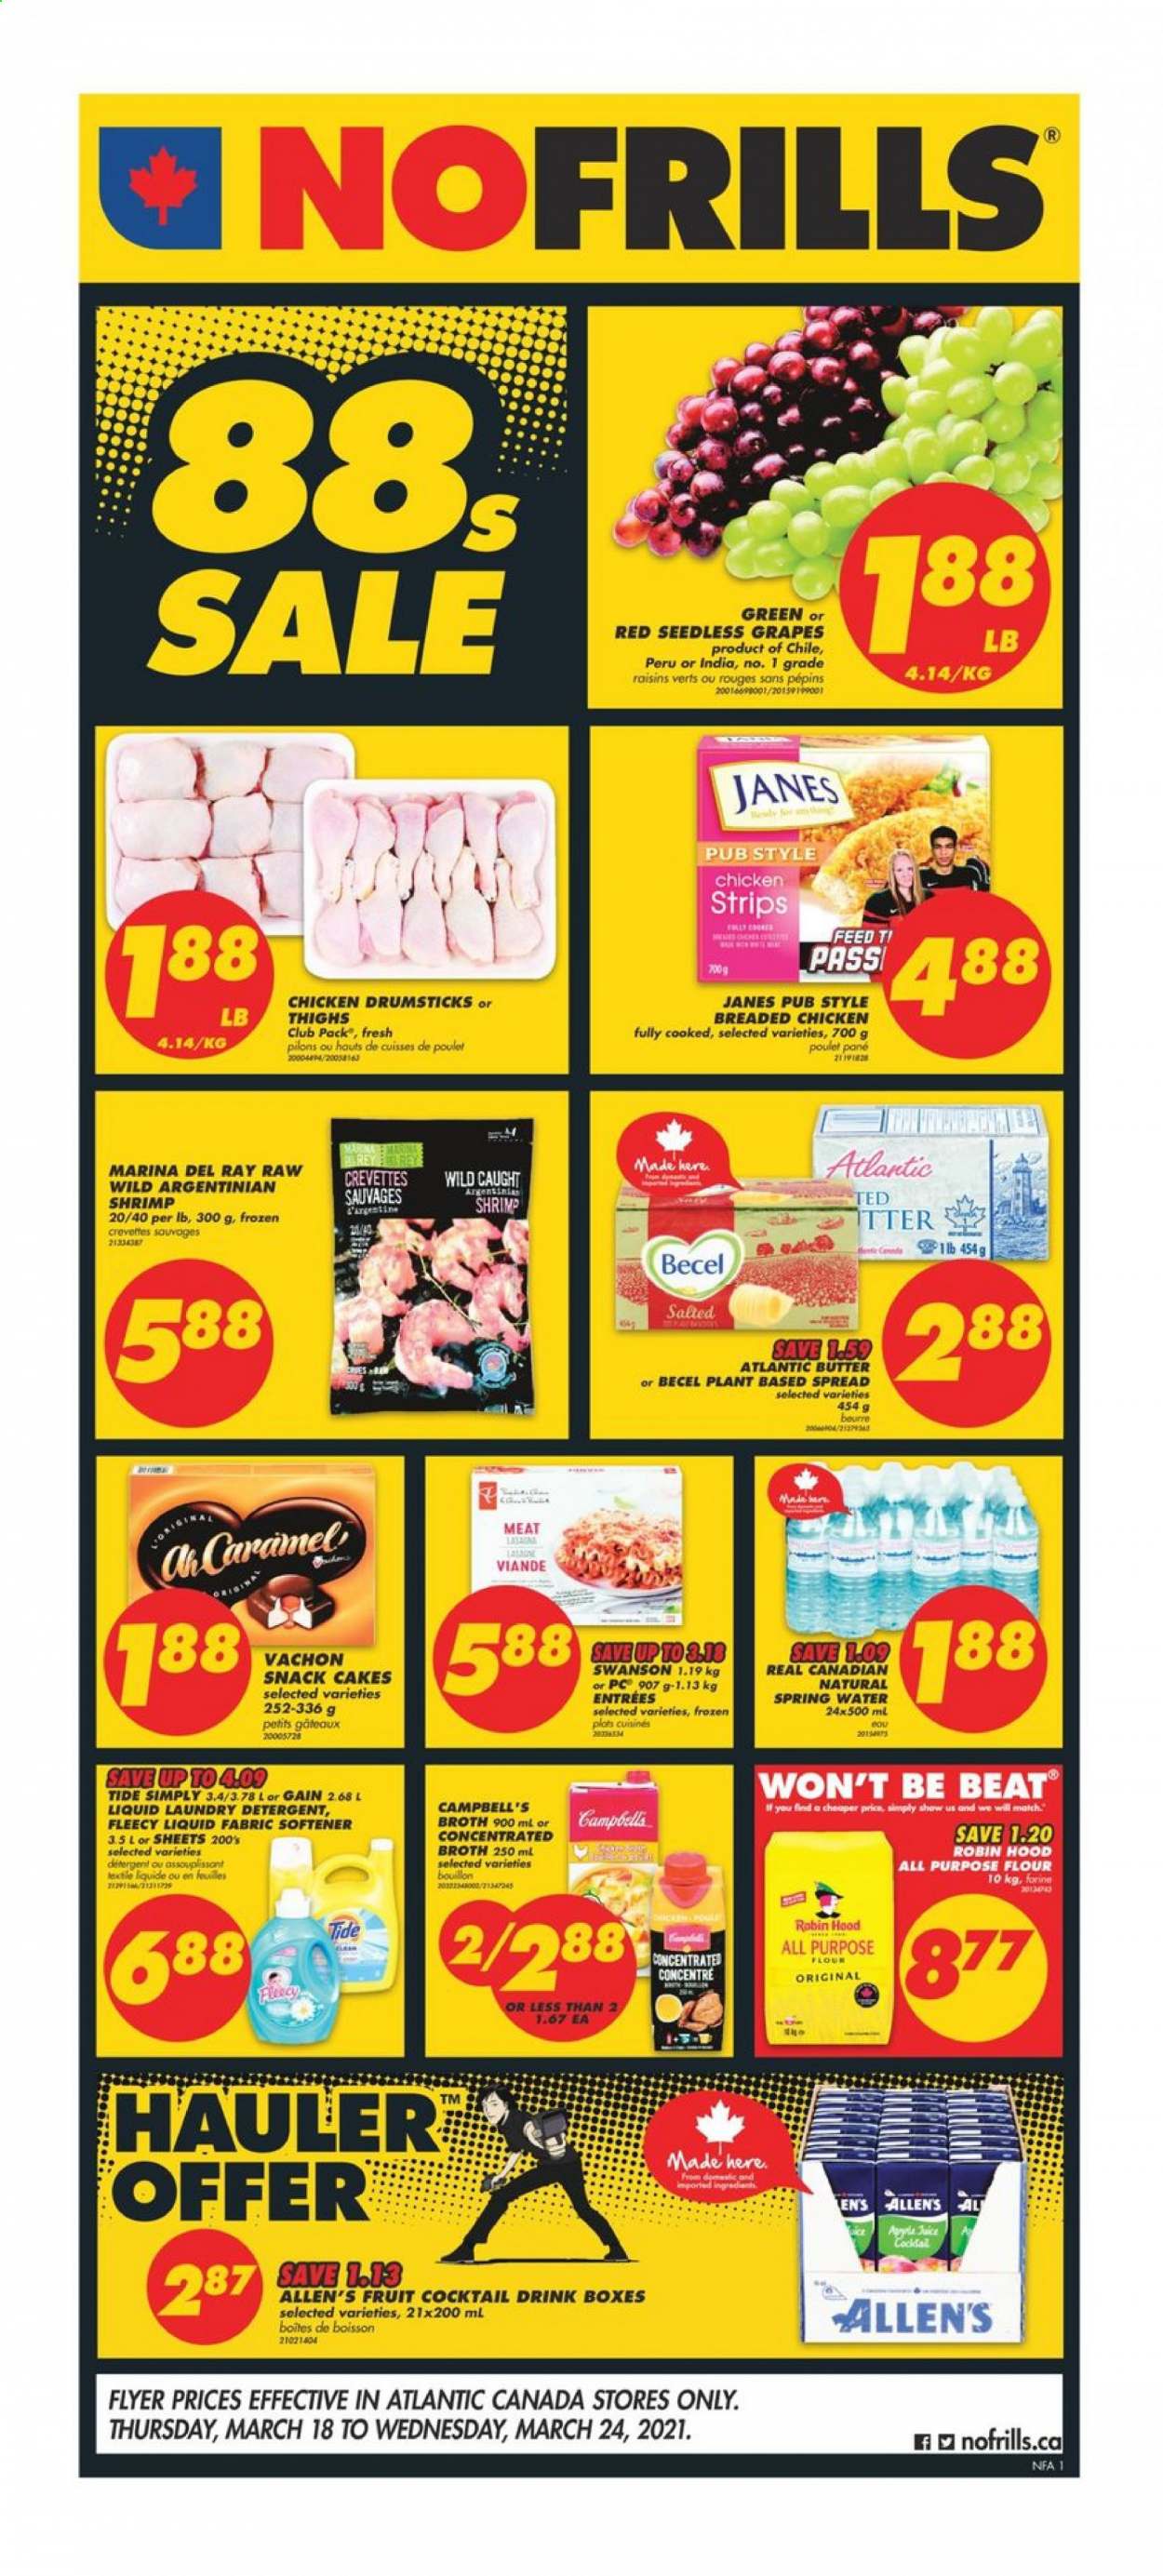 thumbnail - No Frills Flyer - March 18, 2021 - March 24, 2021 - Sales products - cake, grapes, seedless grapes, shrimps, Campbell's, butter, strips, chicken strips, snack, all purpose flour, bouillon, flour, broth, caramel, dried fruit, juice, spring water, chicken drumsticks, chicken, Gain, Tide, fabric softener, laundry detergent, raisins. Page 1.